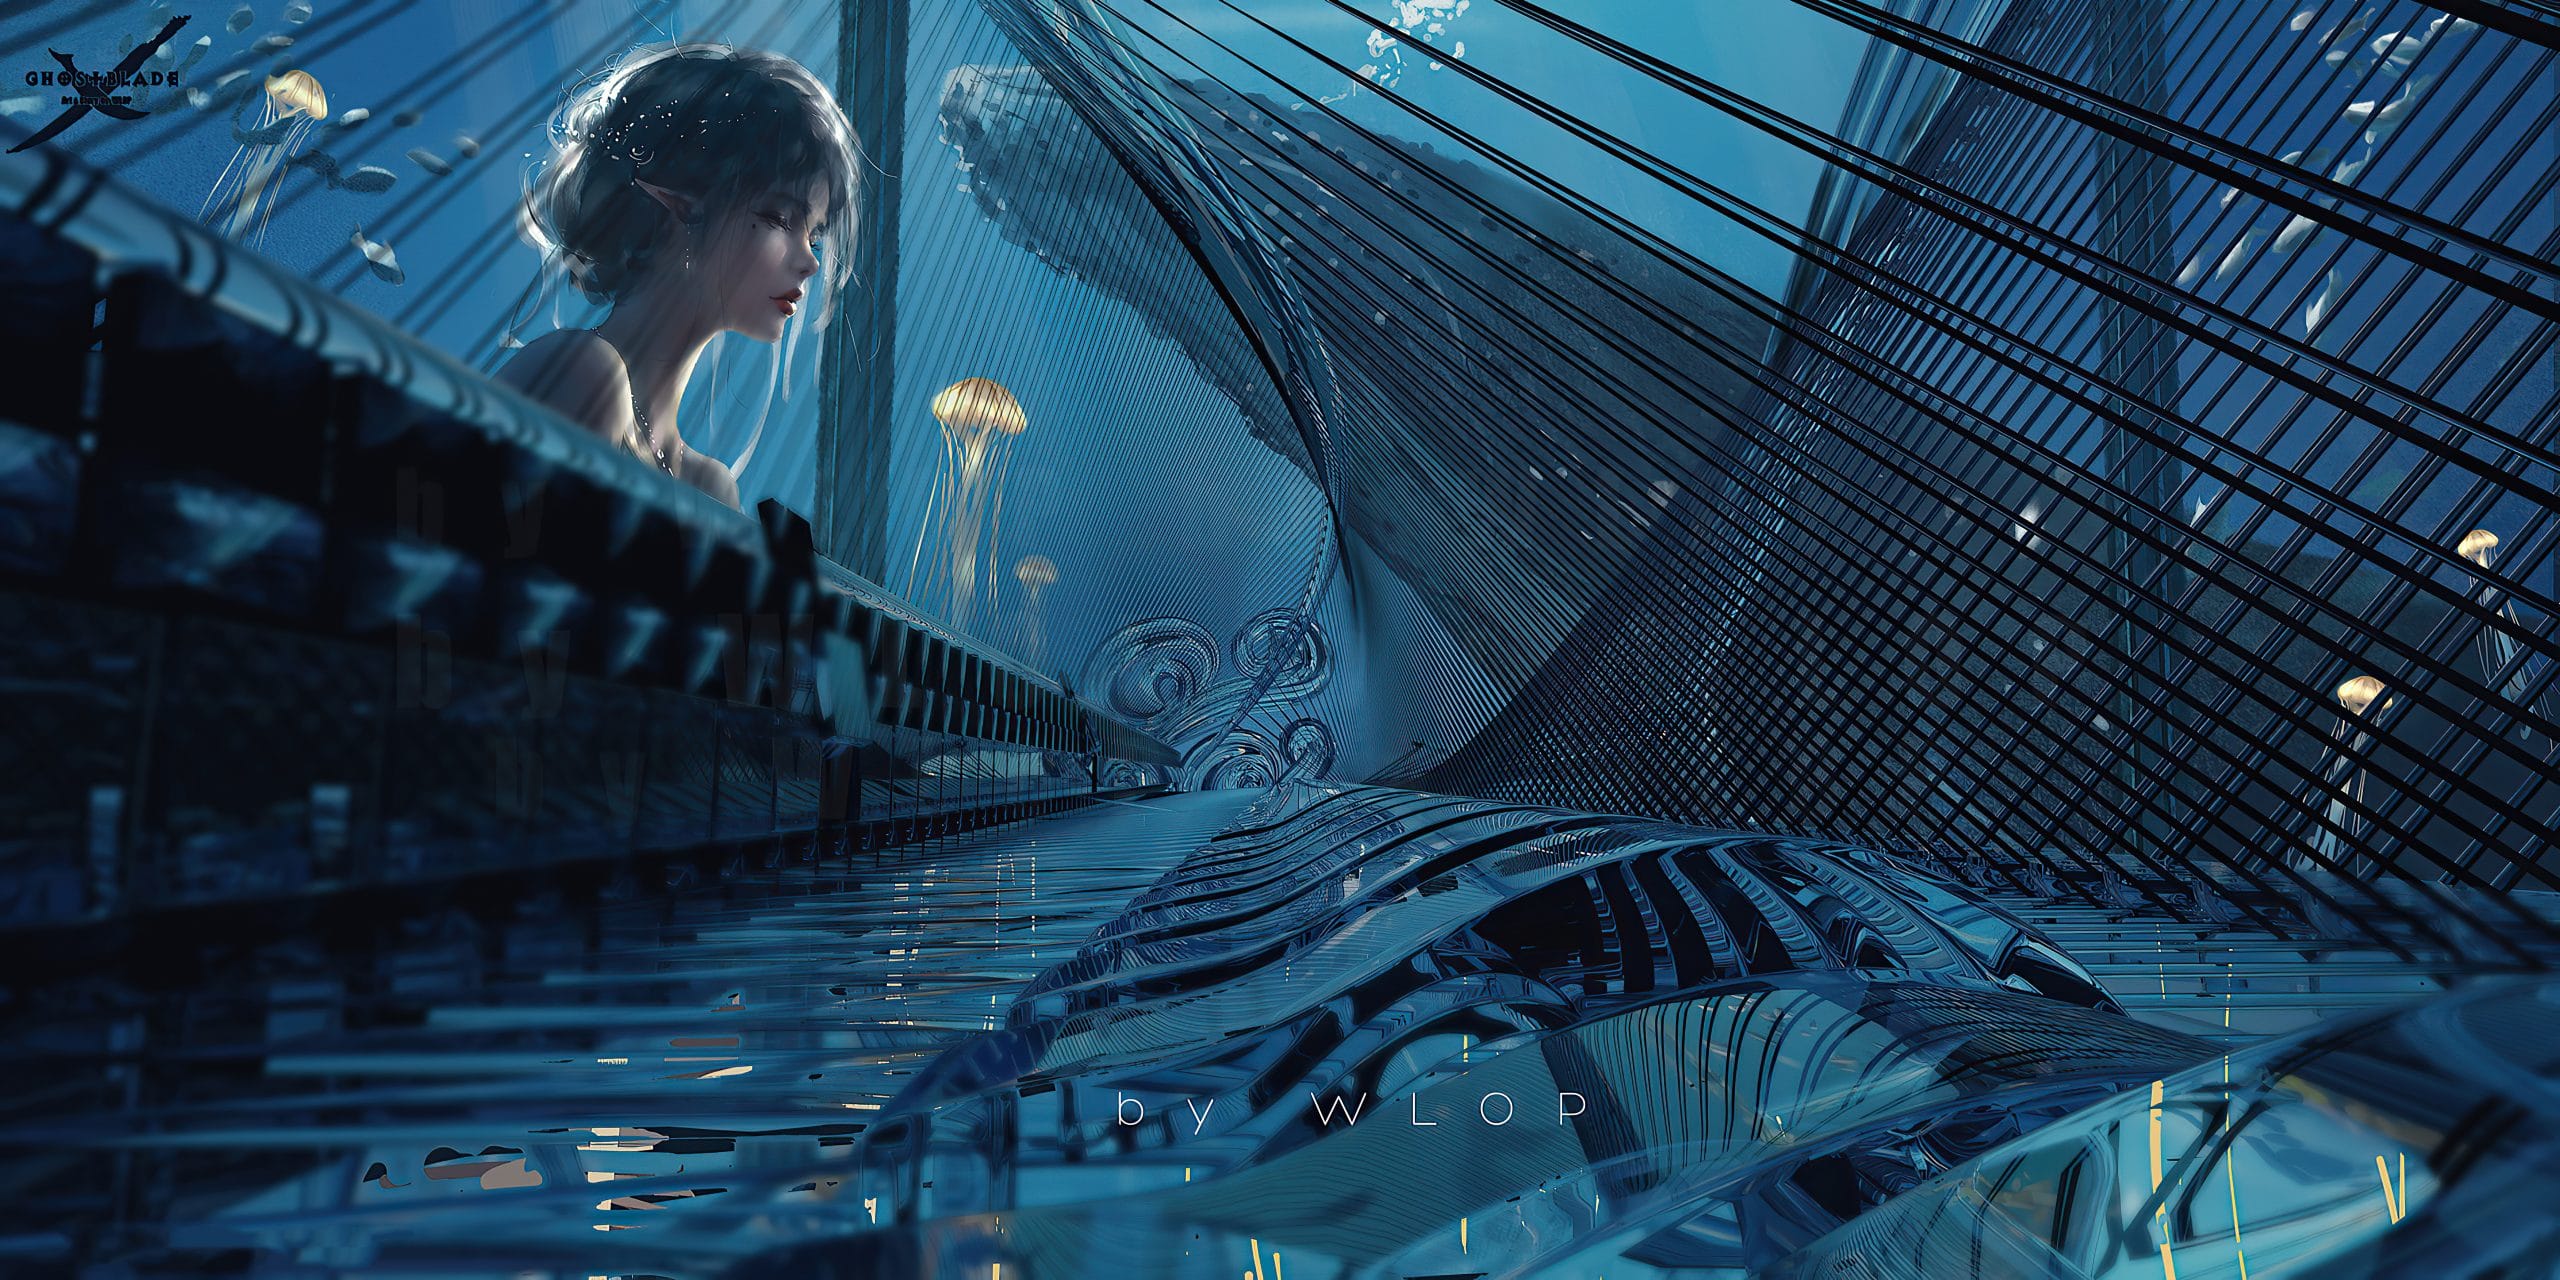 A girl playing the piano underwater a very impressive digital artwork of WLOP